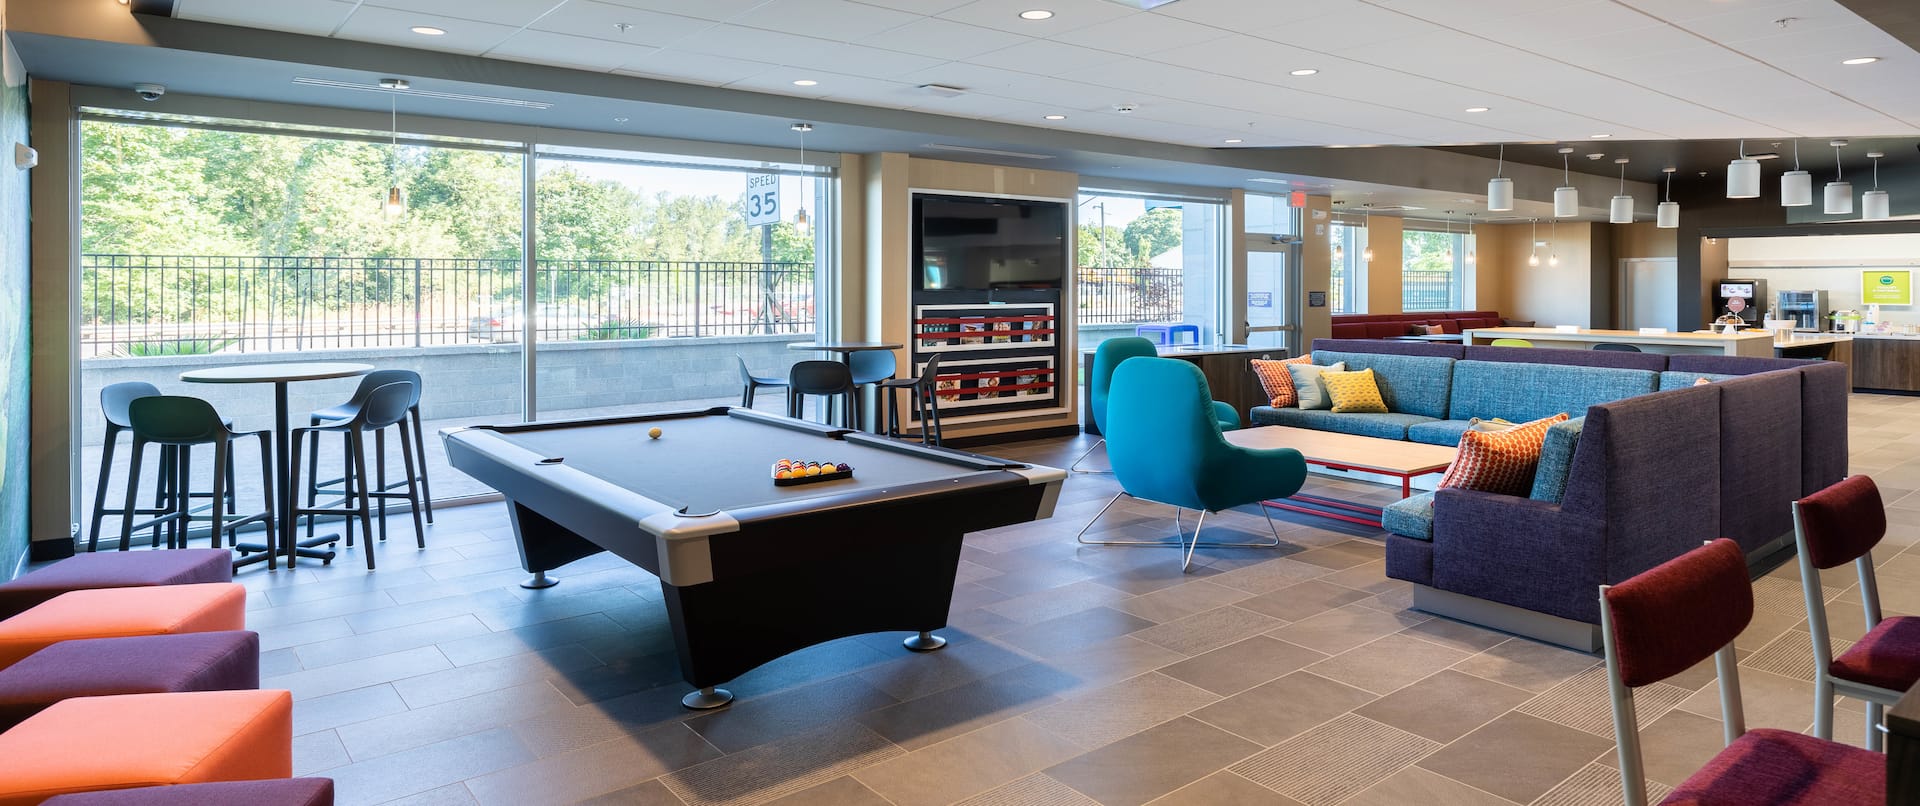 Pool Table and Comfortable Seating Area in Lobby